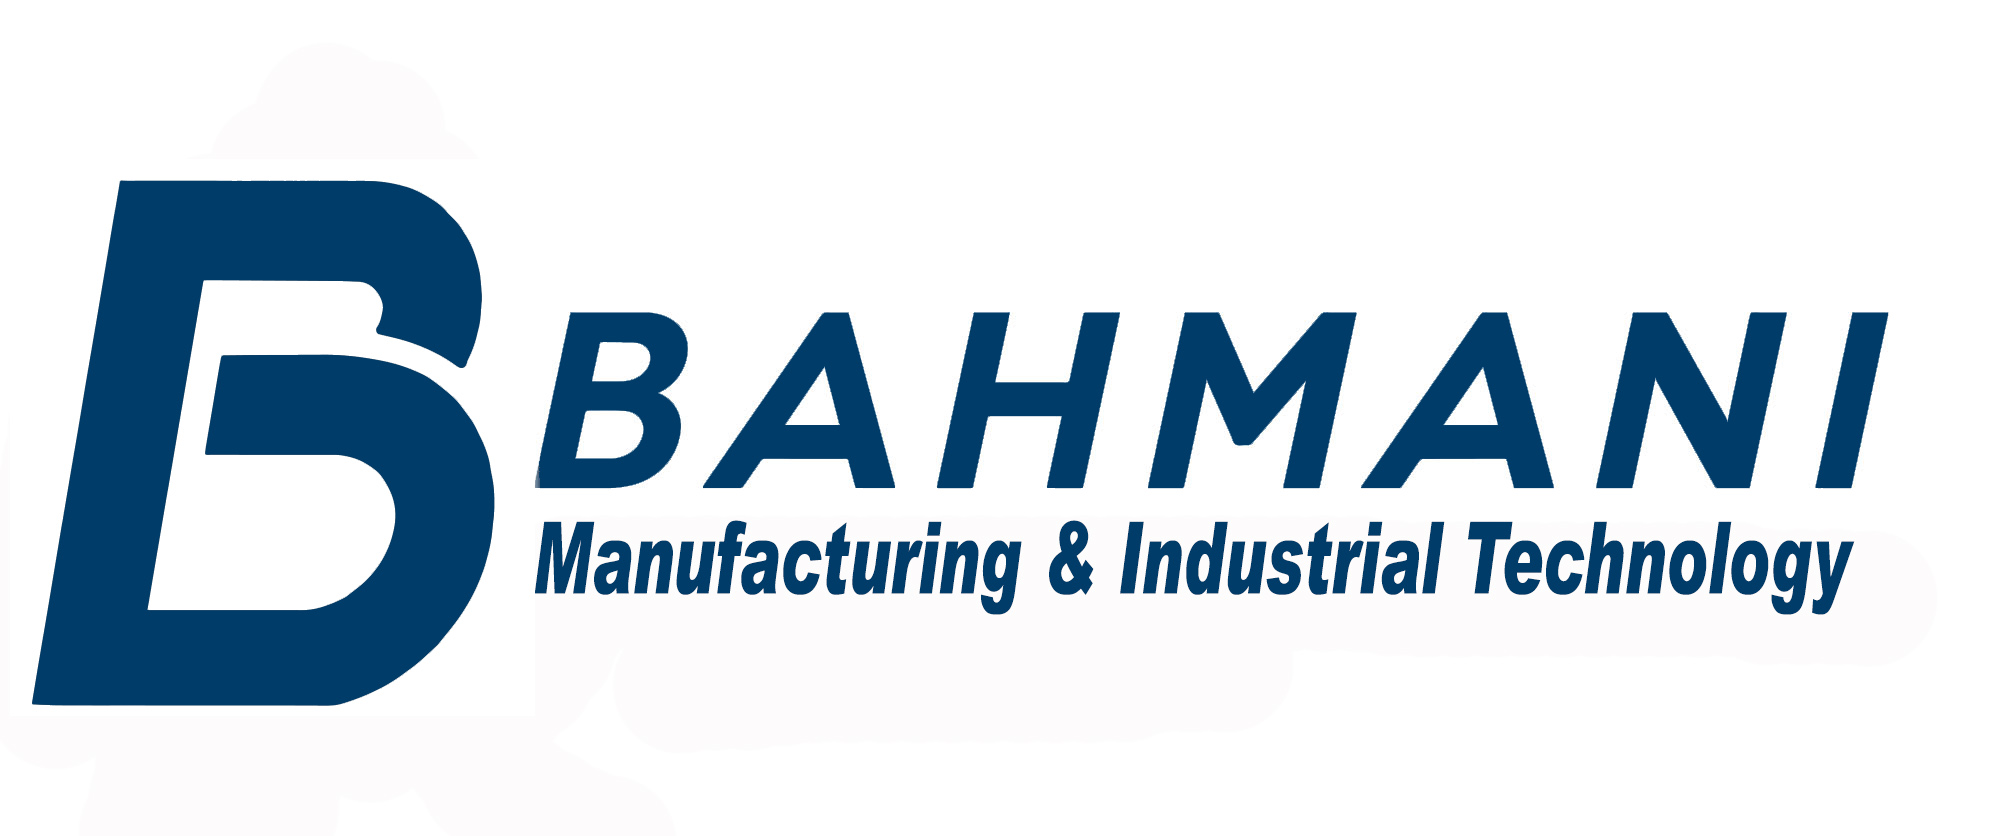 Bahmani Manufacturing and Industrial Technology